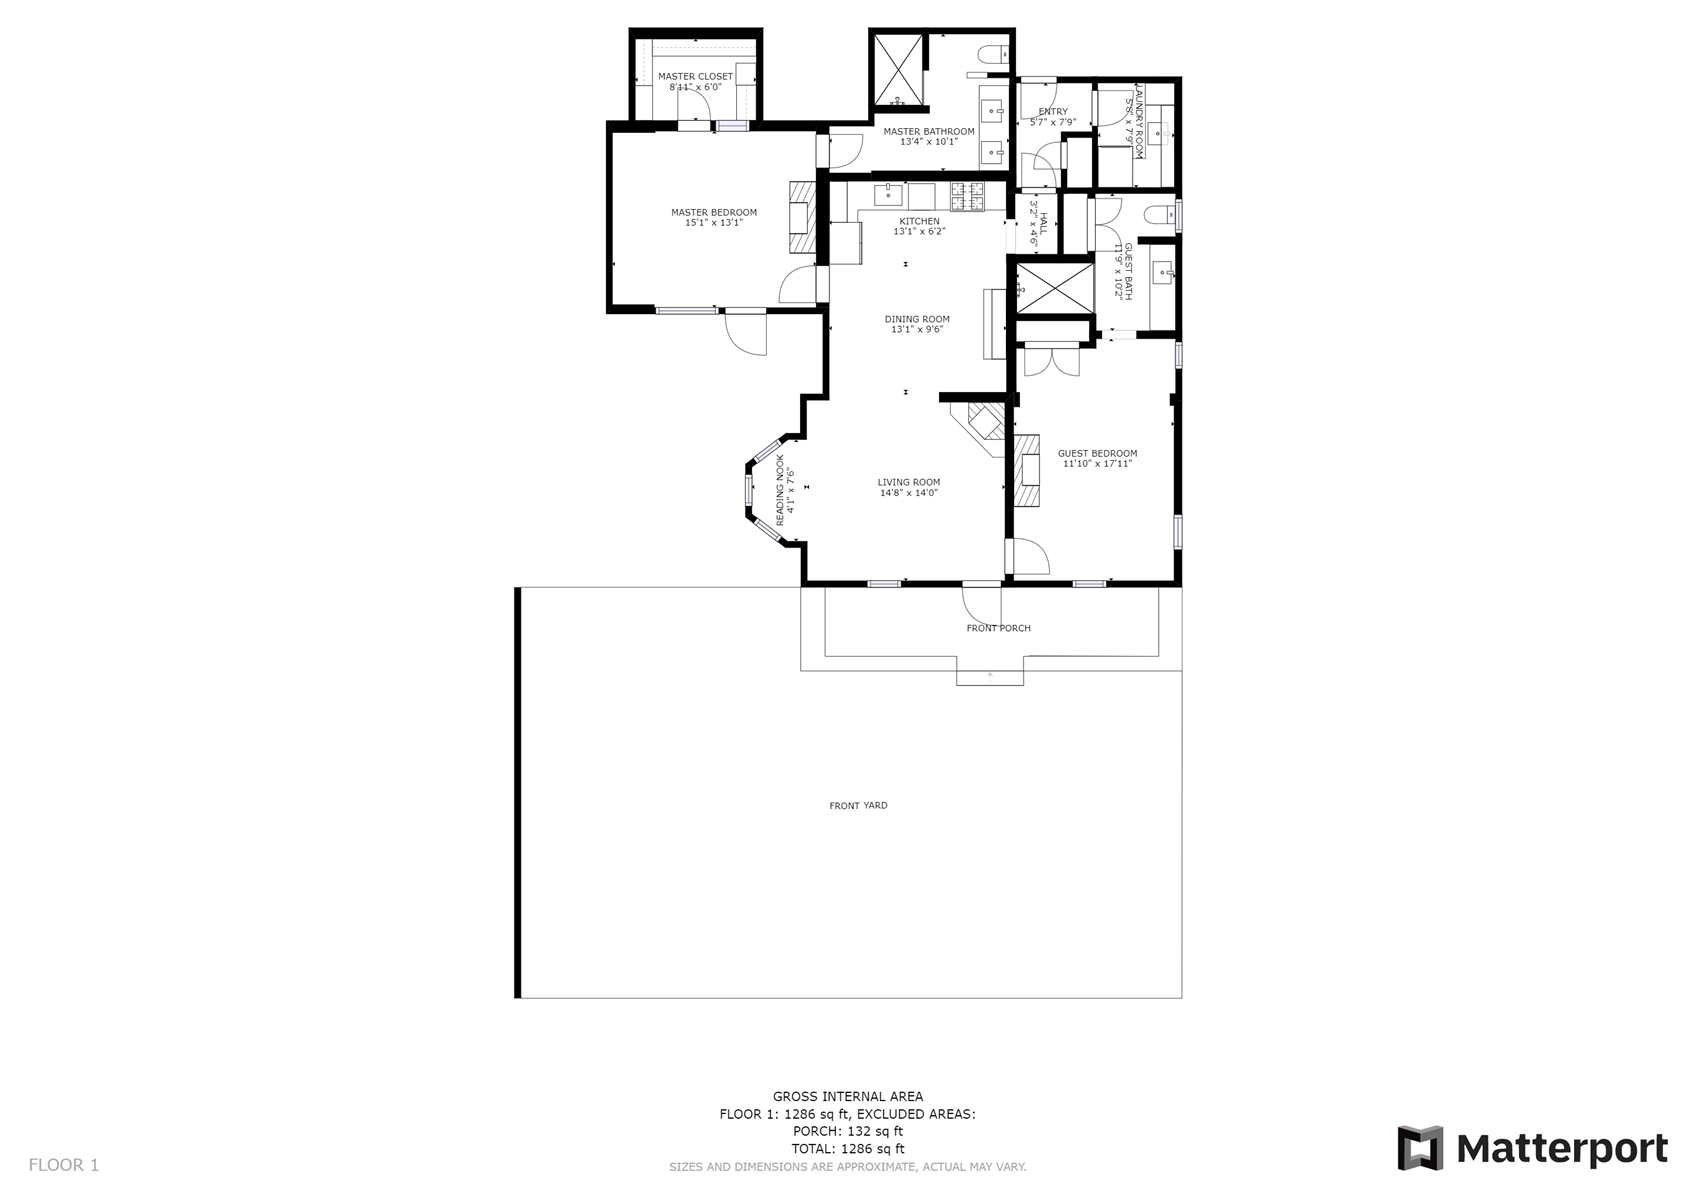 Floor Plan for Artesia Casita: NEW Casita in The Downtown Railyard District just a short walk to the Plaza